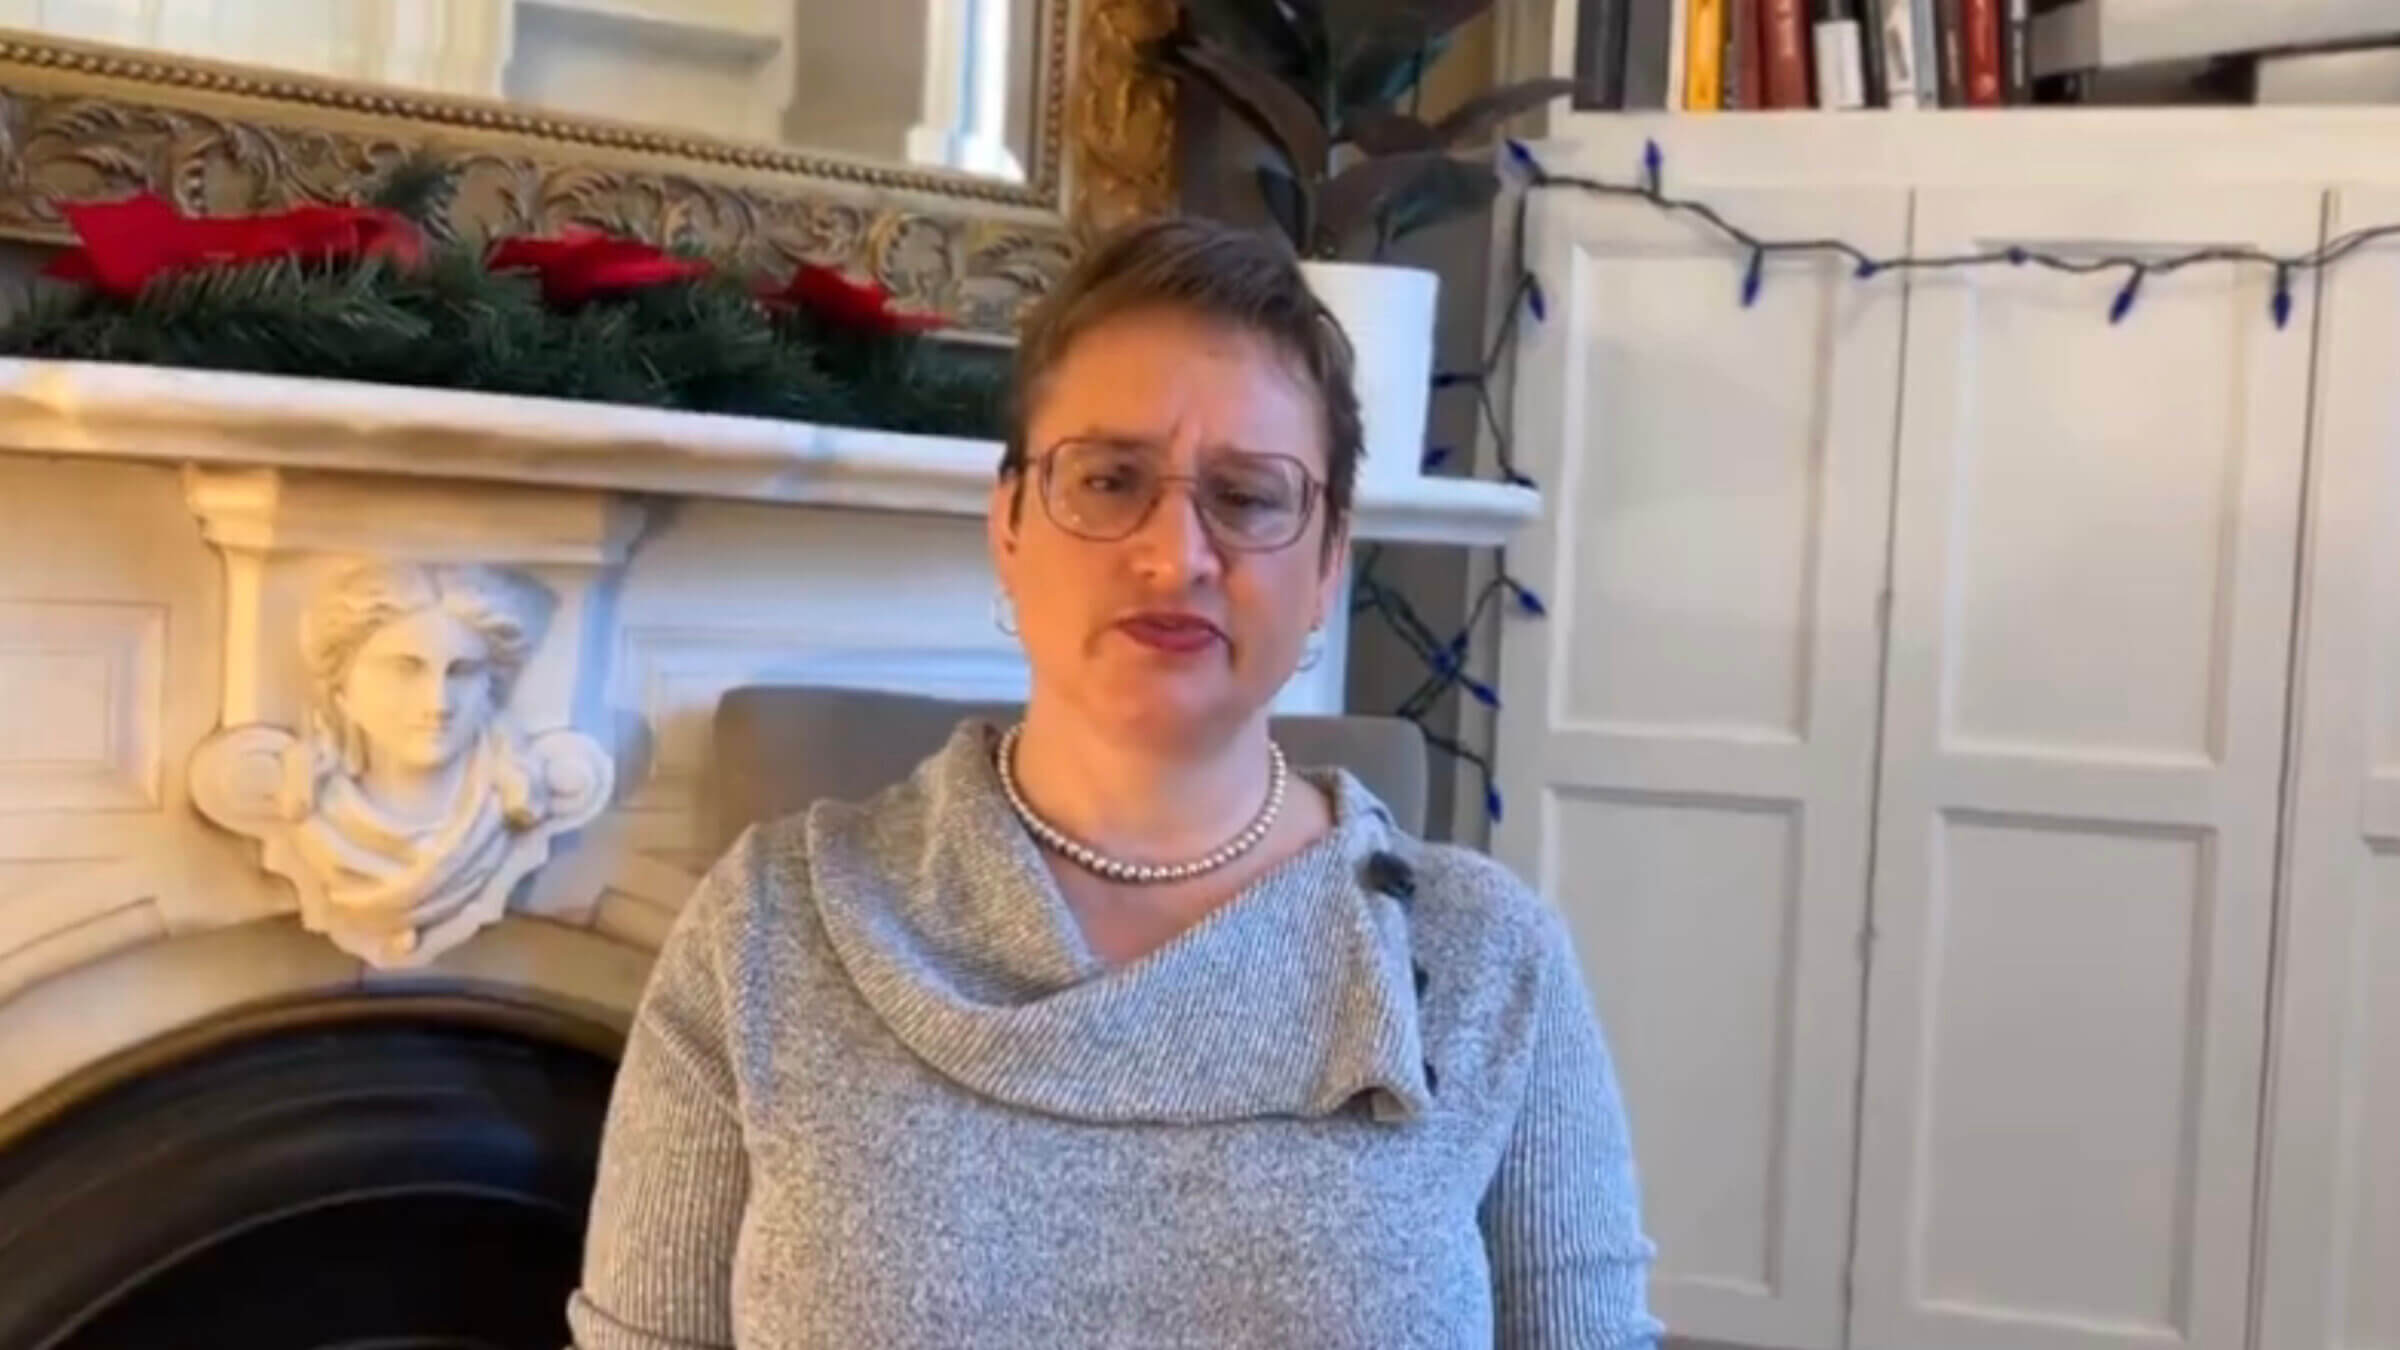 Missouri Rep. Sarah Unsicker, seen here in a video announcing her withdrawal from the state's attorney general race, accused a former opponent of being an unregistered Israeli agent. Missouri's secretary of state said there was "no evidence" to support the claim.